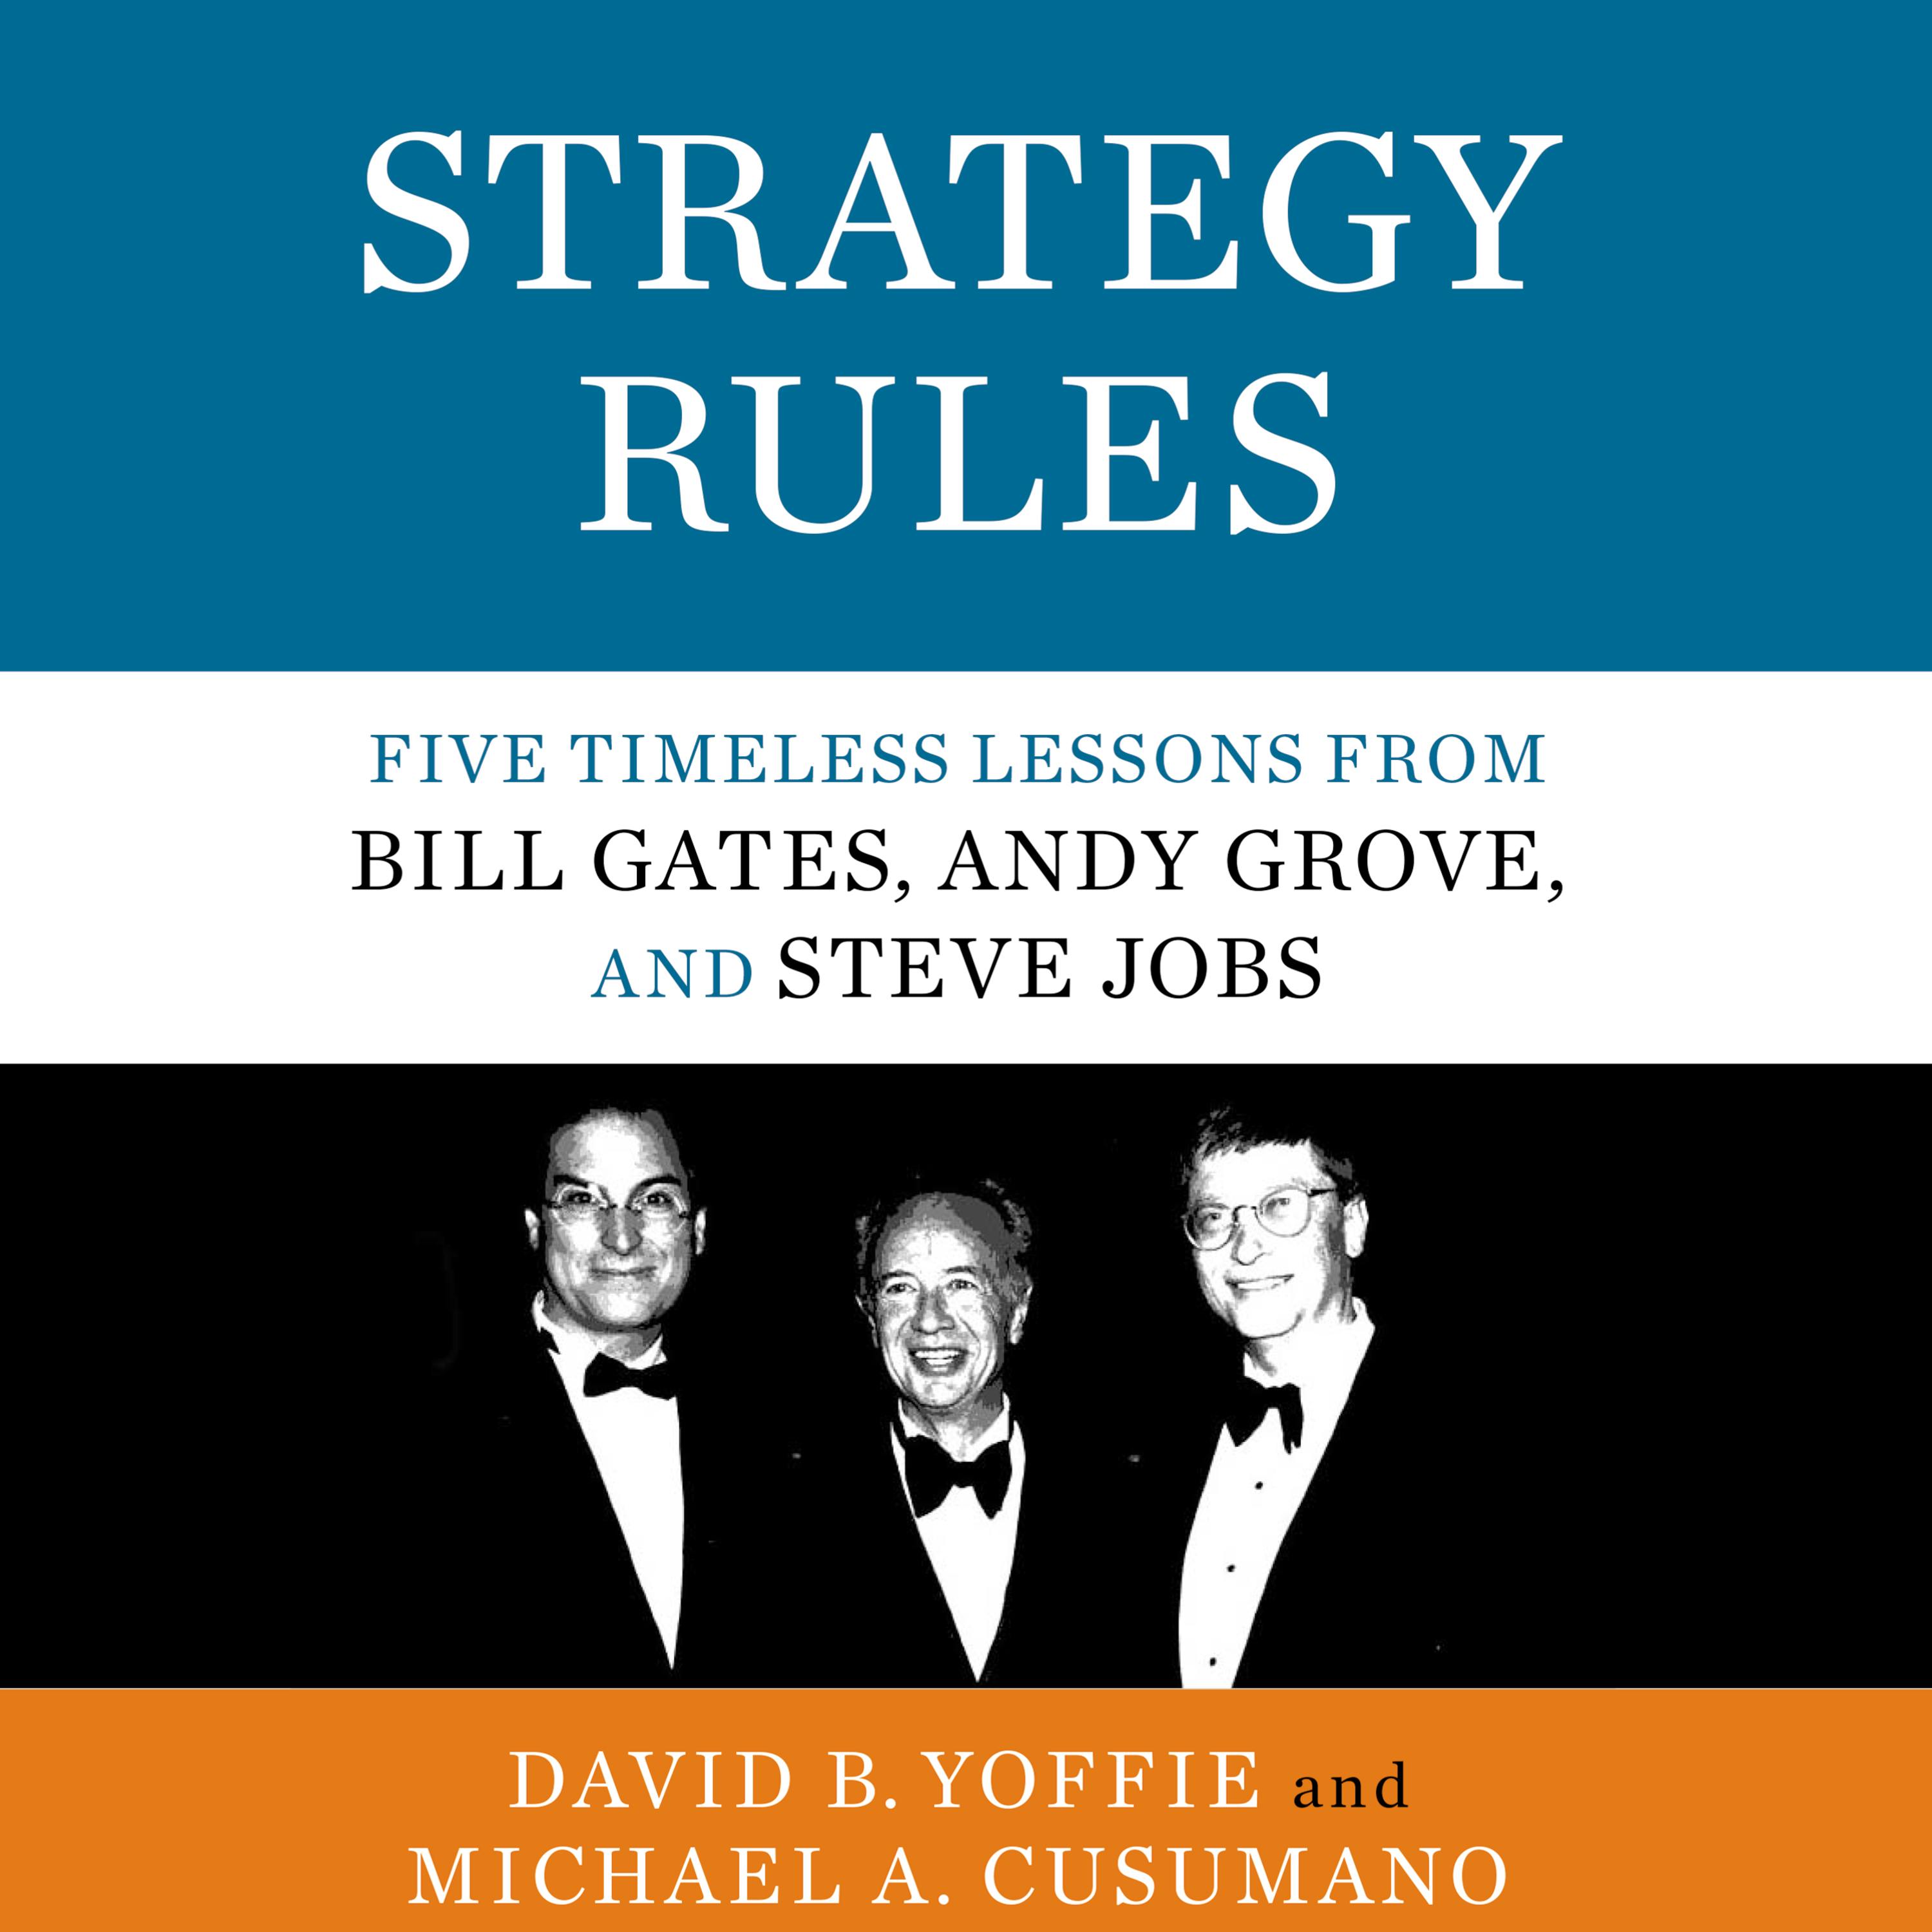 Strategy Rules: Five Timeless Lessons from Bill Gates, Andy Grove, and Steve Jobs - Michael A. Cusumano, David B. Yoffie